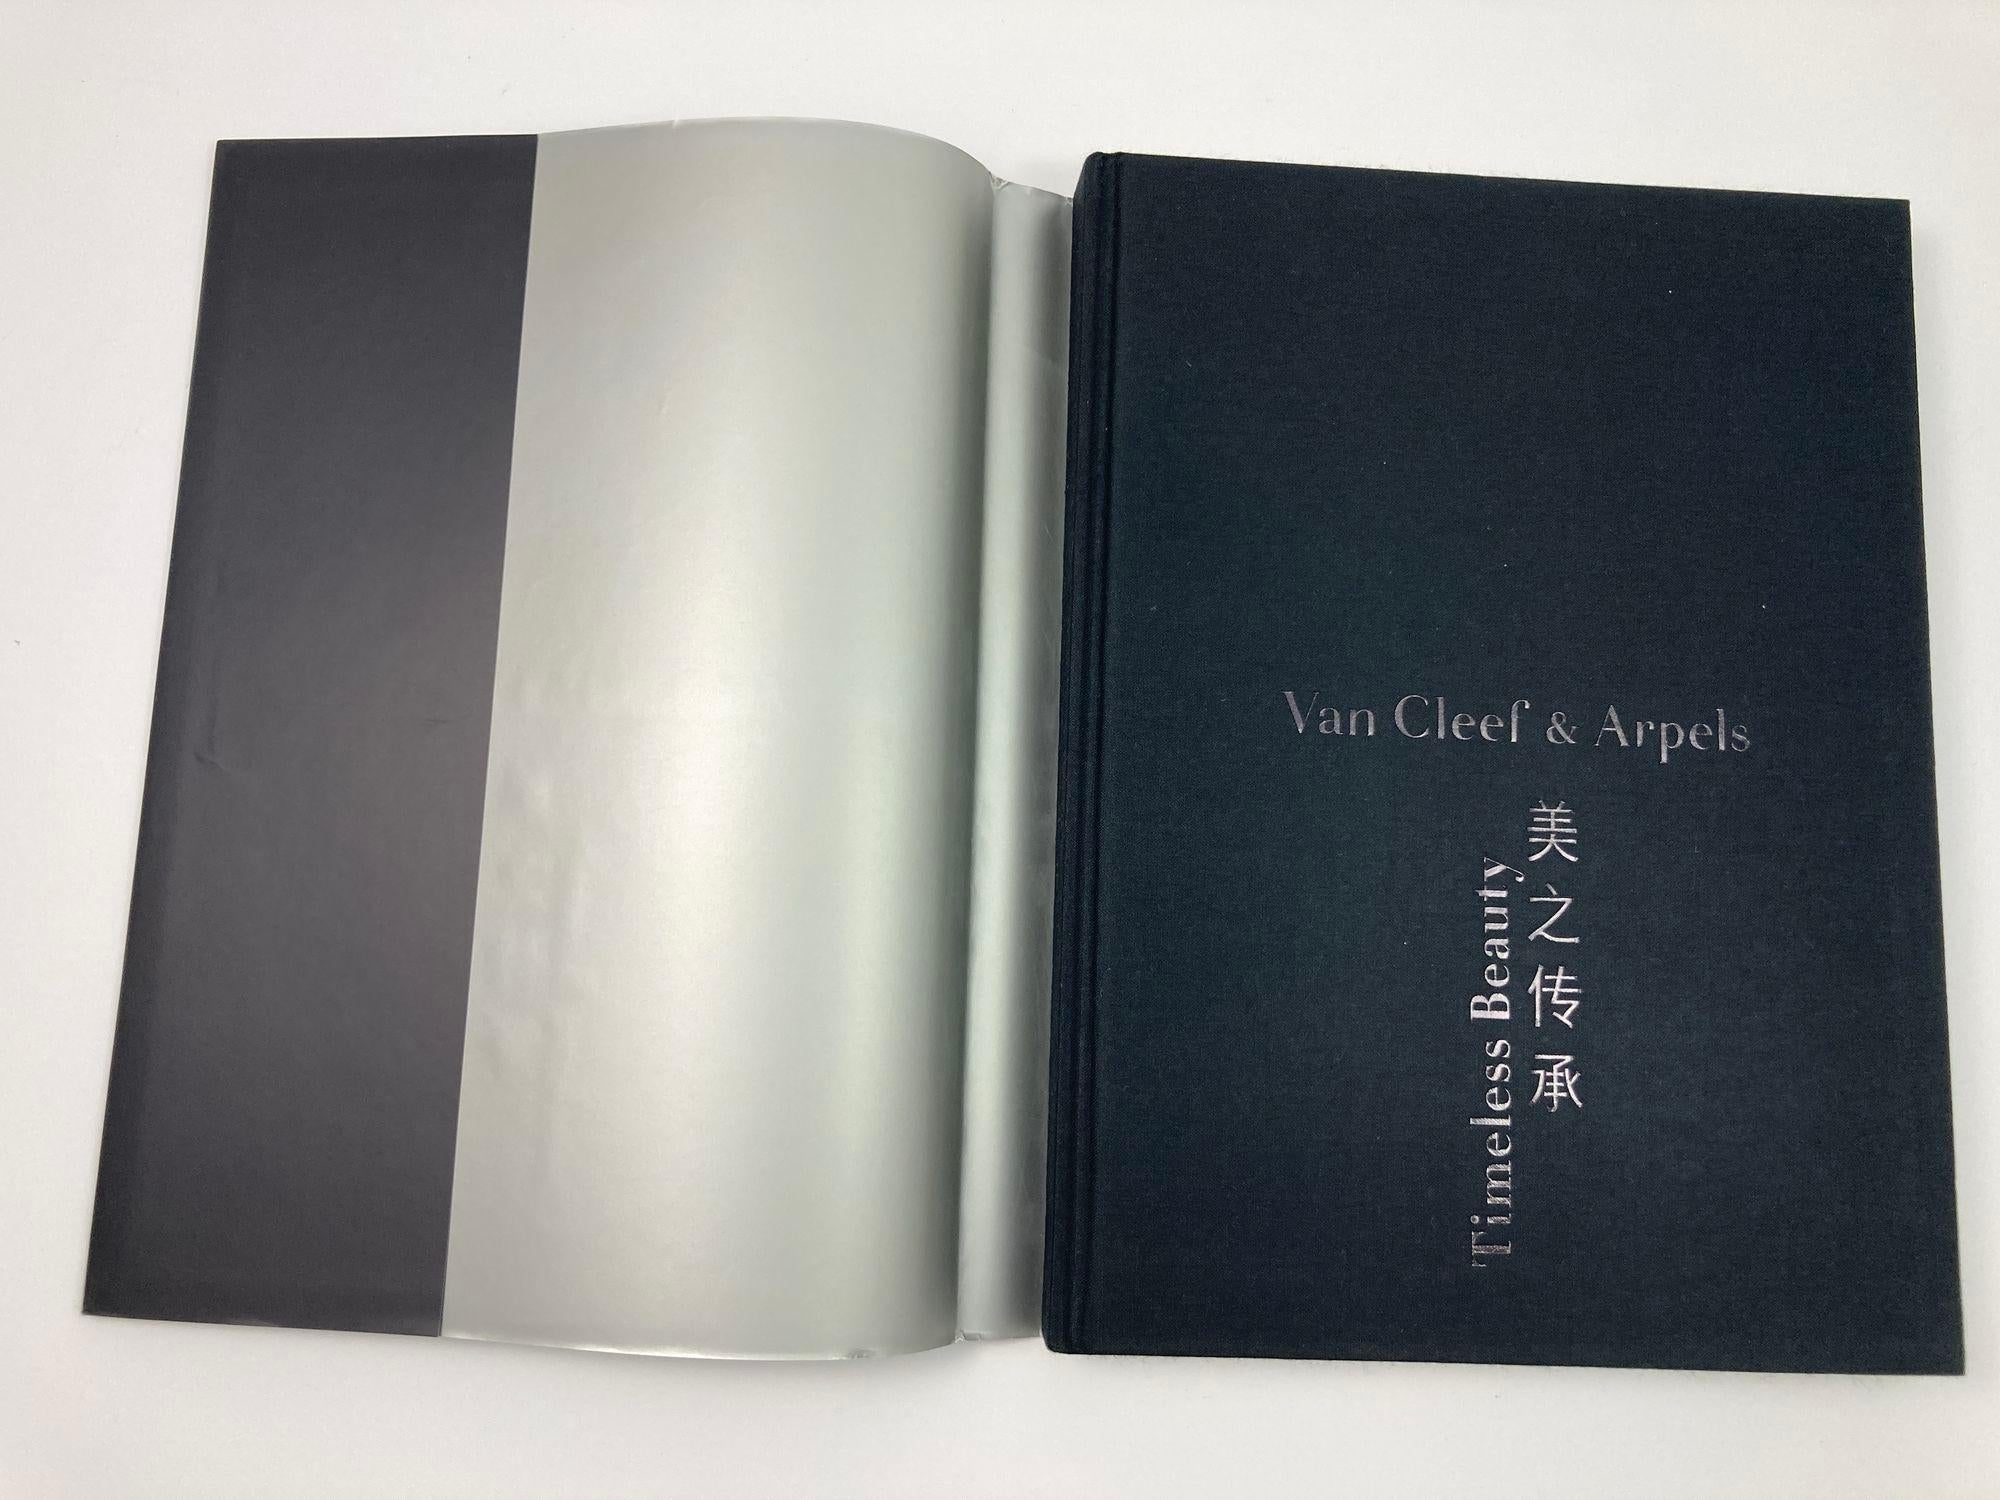 Contemporary Van Cleef & Arpels: Timeless Beauty Hardcover Book 2012 For Sale